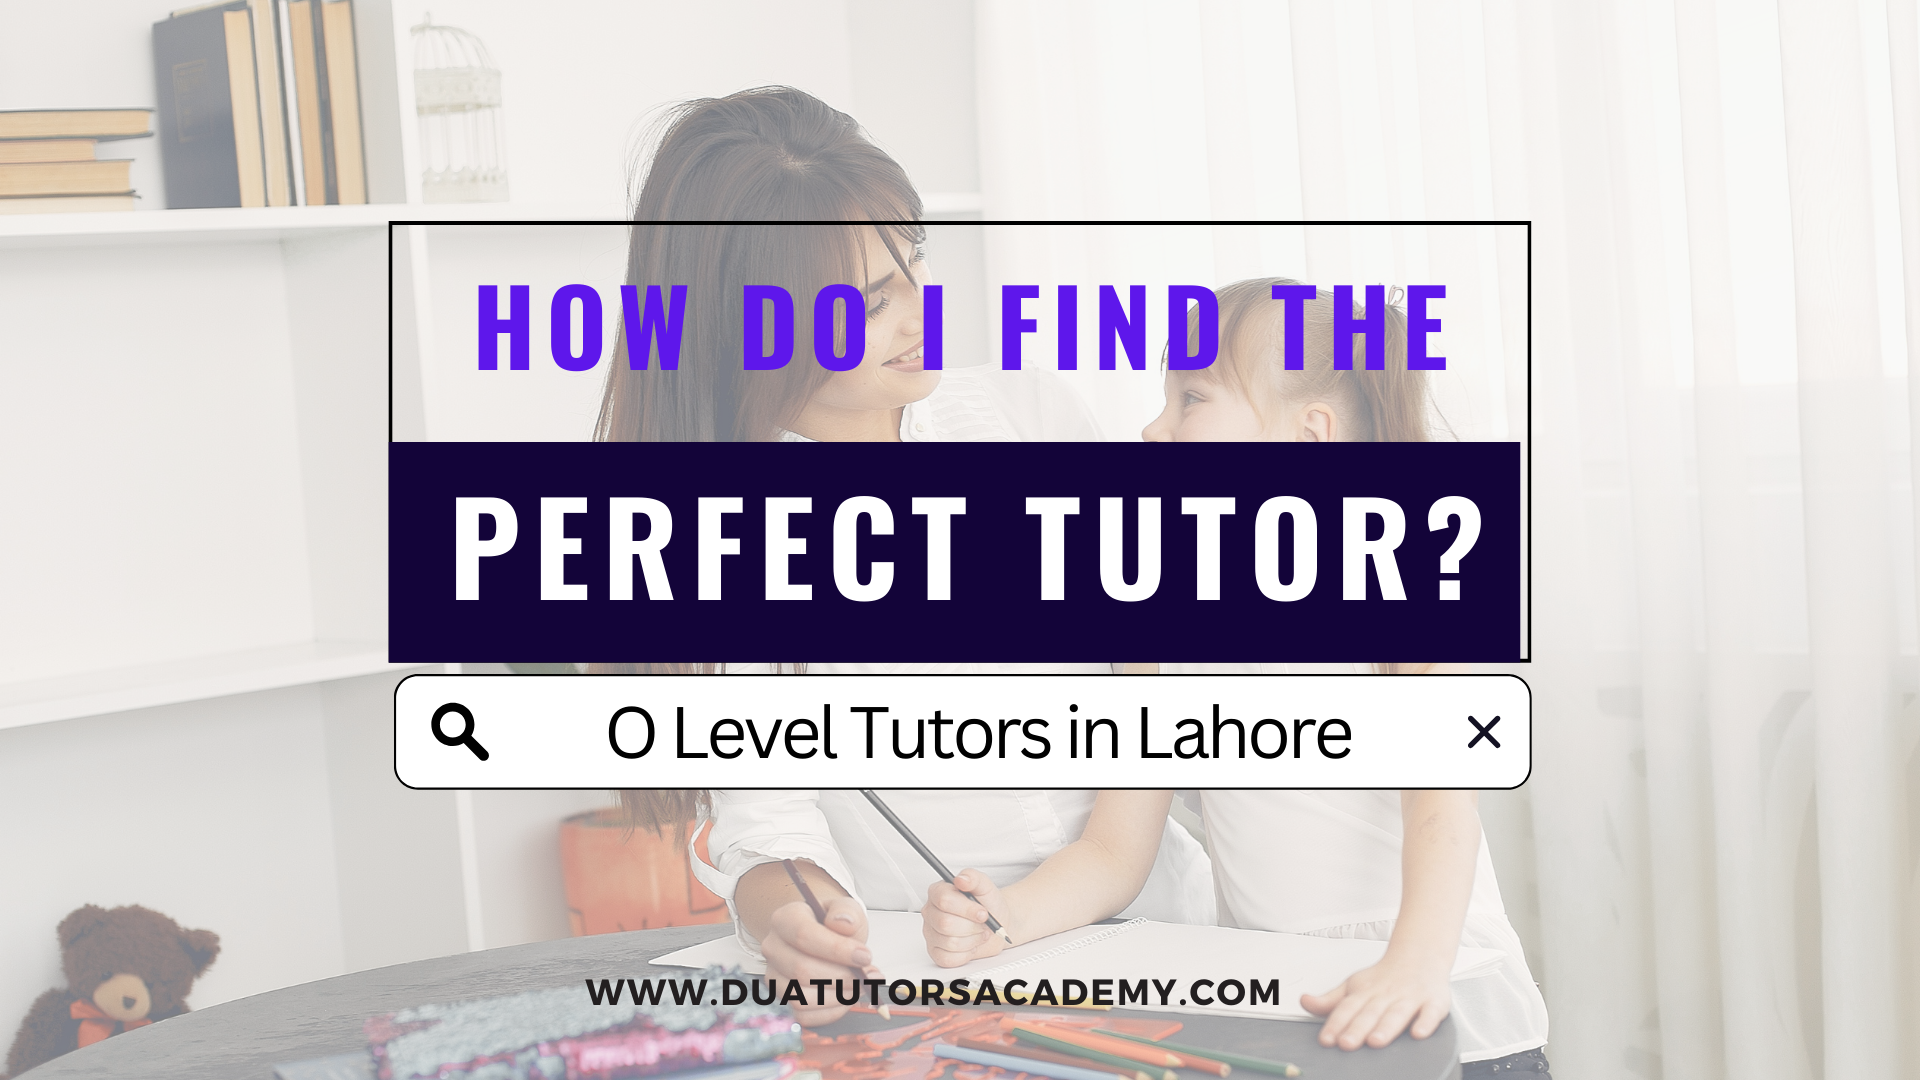 Tips for finding the perfect tutor